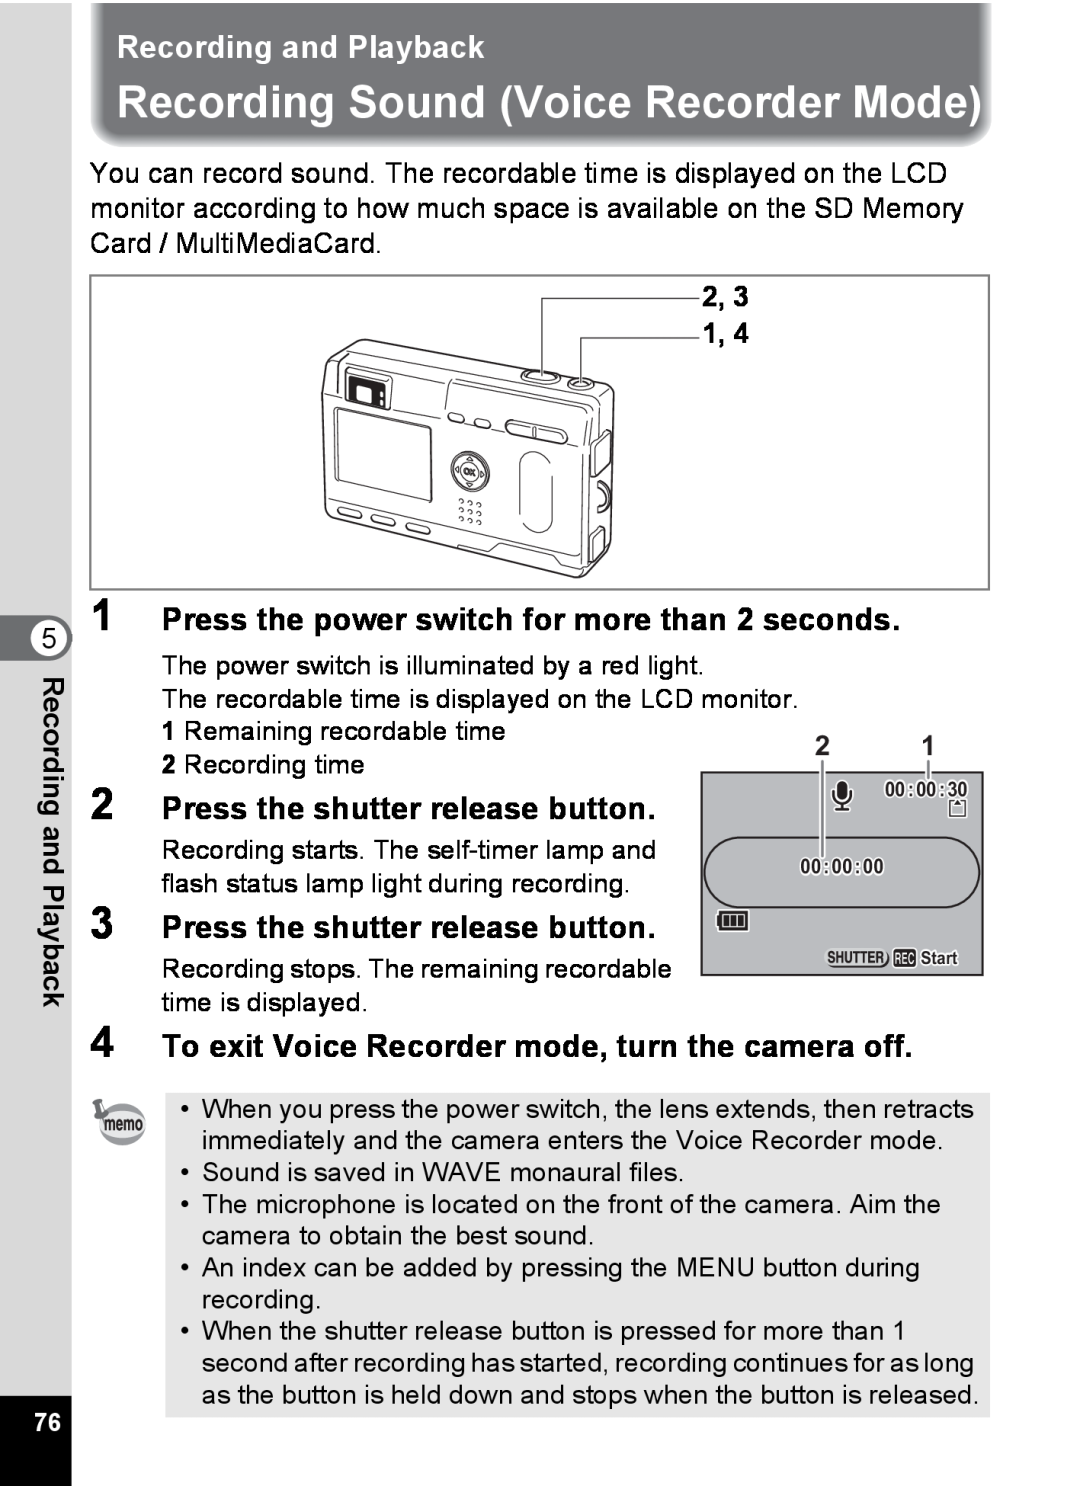 Pentax S4 Recording Sound Voice Recorder Mode, Recording and Playback, Press the power switch for more than 2 seconds 